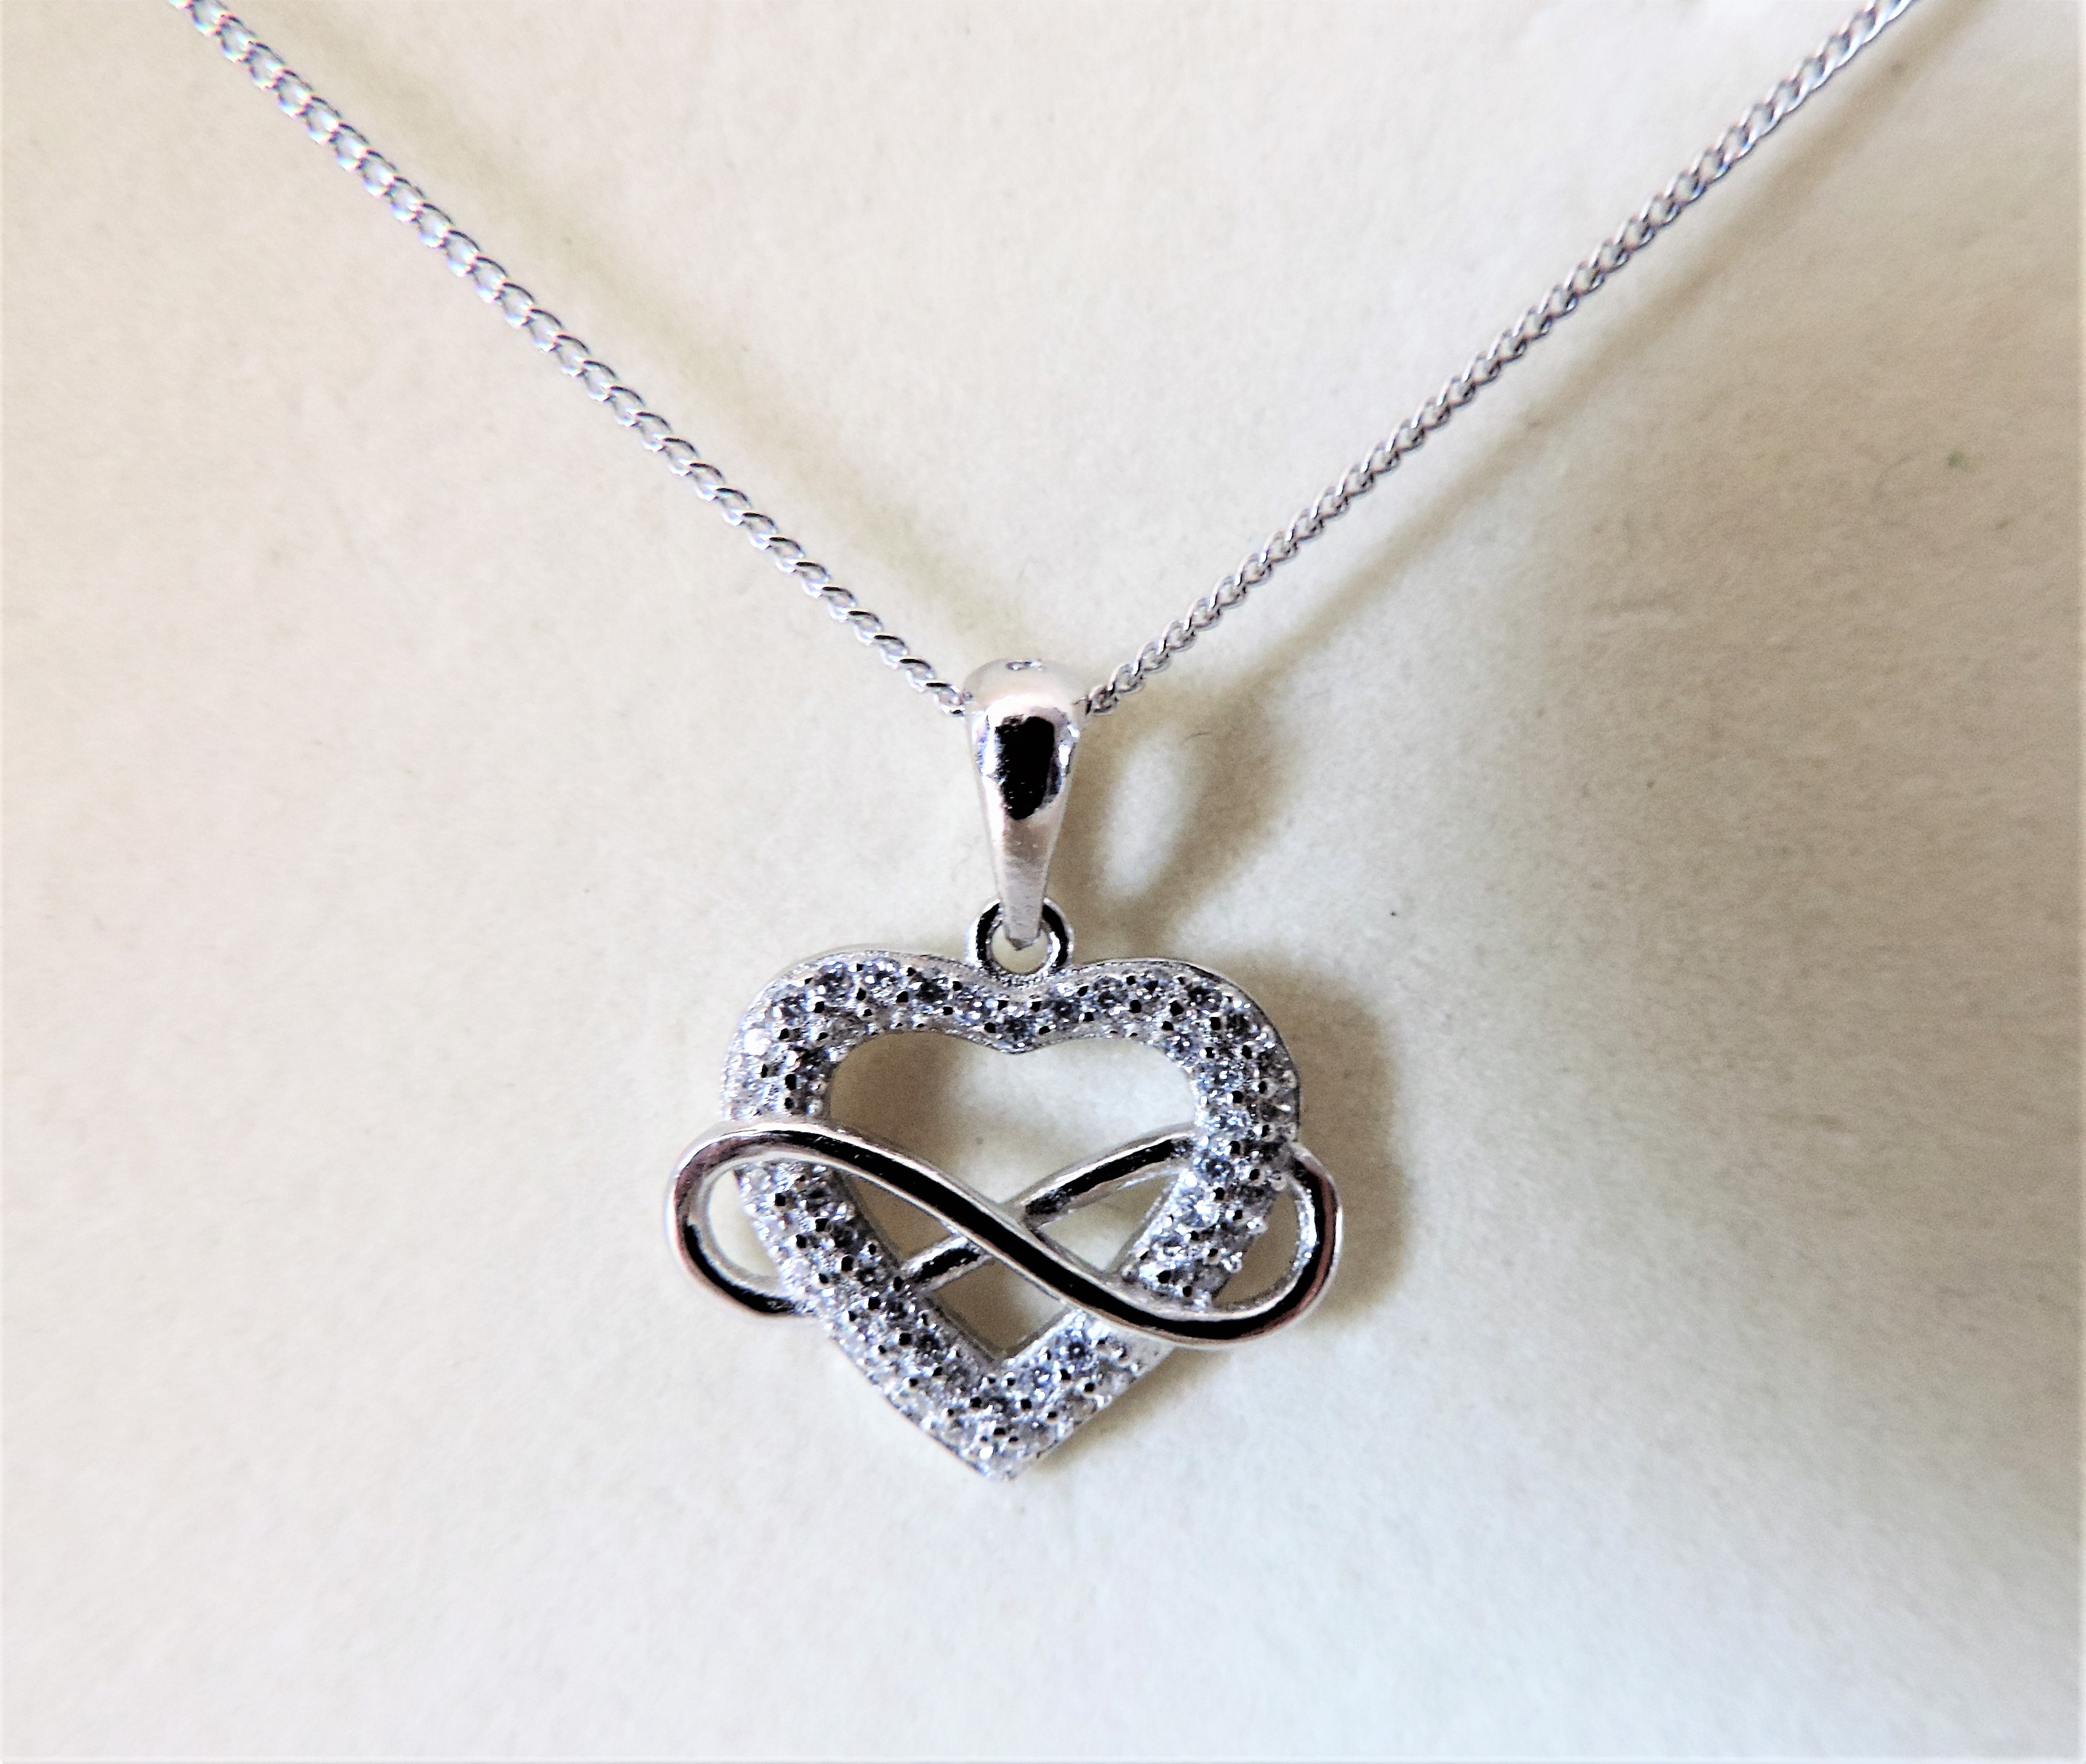 925 Sterling Silver Heart Shaped Pendant Necklace - Image 2 of 2